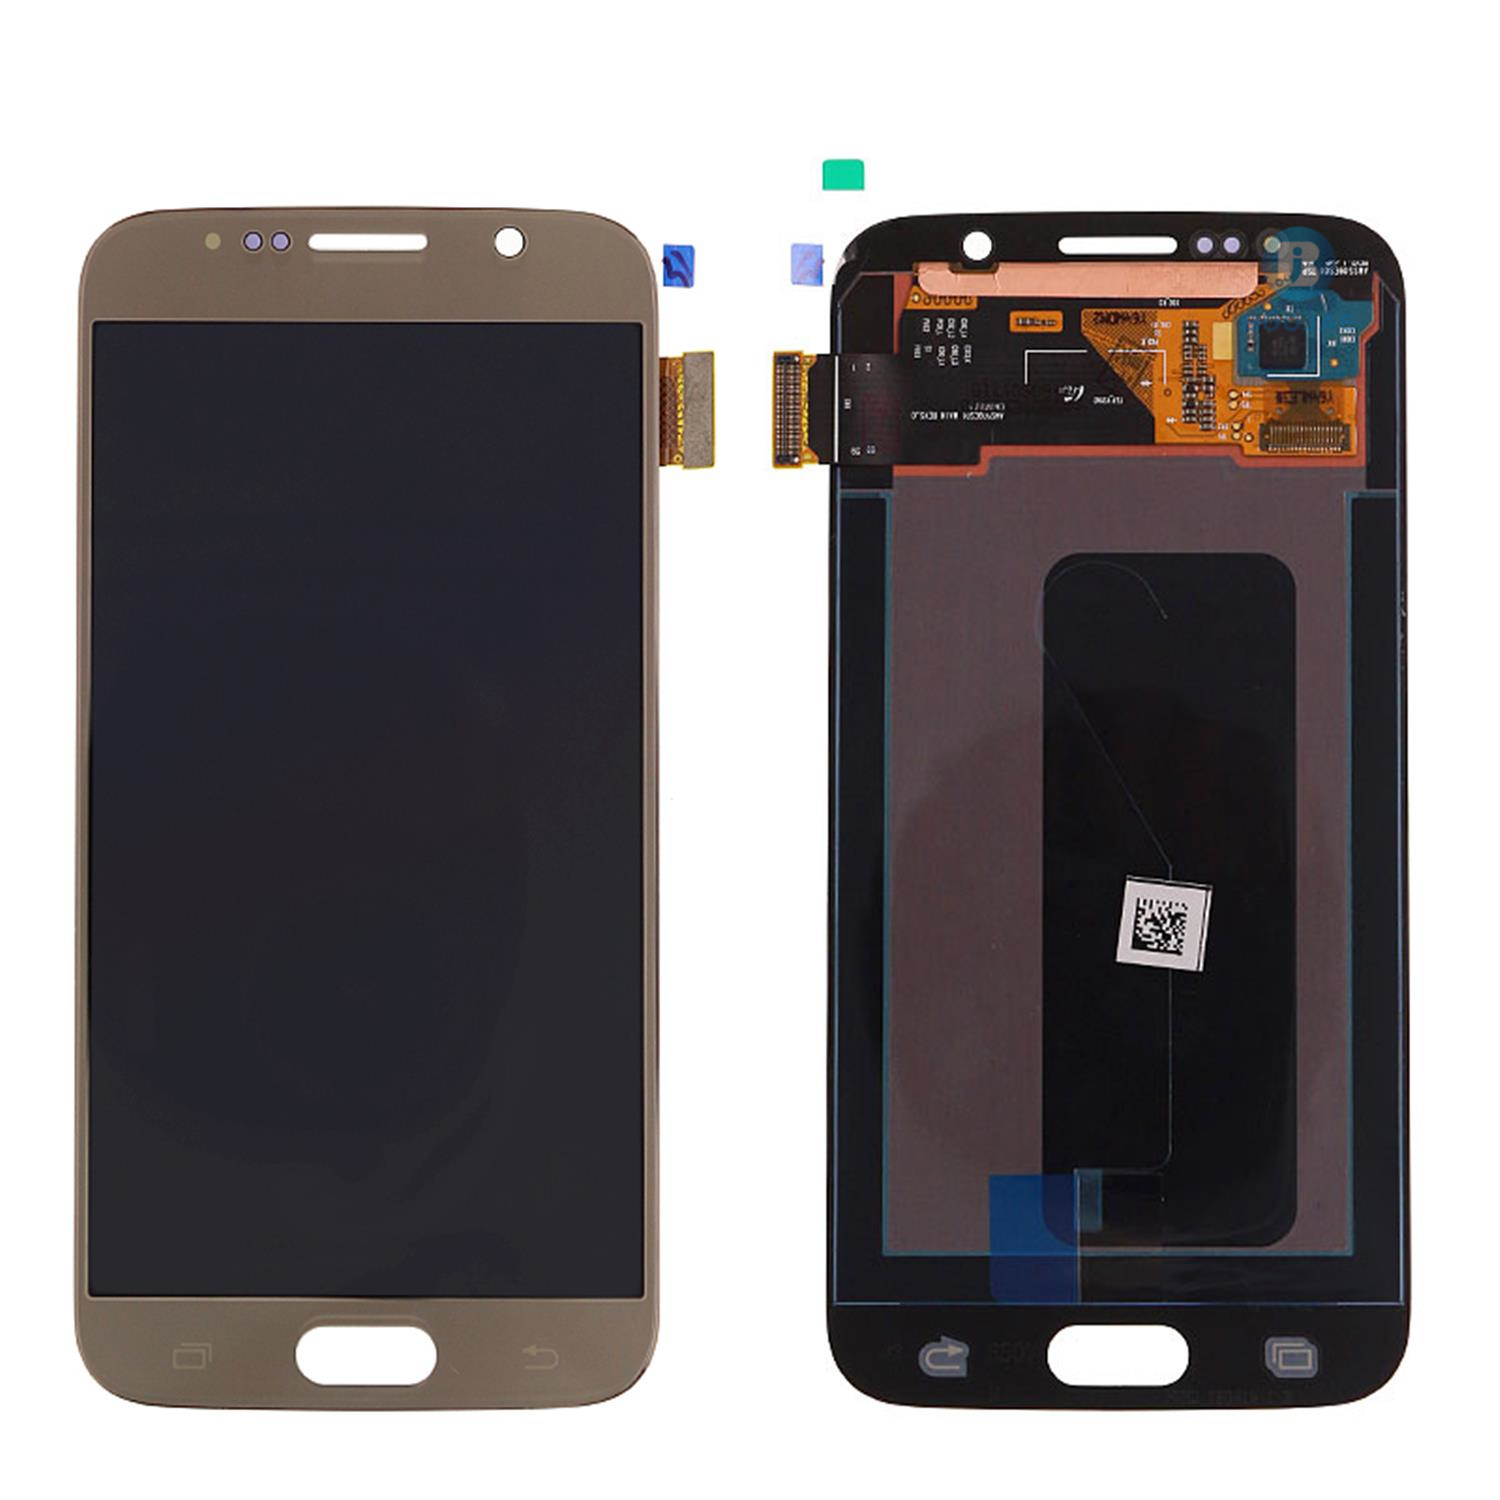 Samsung Galaxy S6 G920 LCD Screen Display and Touch Panel Digitizer Assembly Replacement